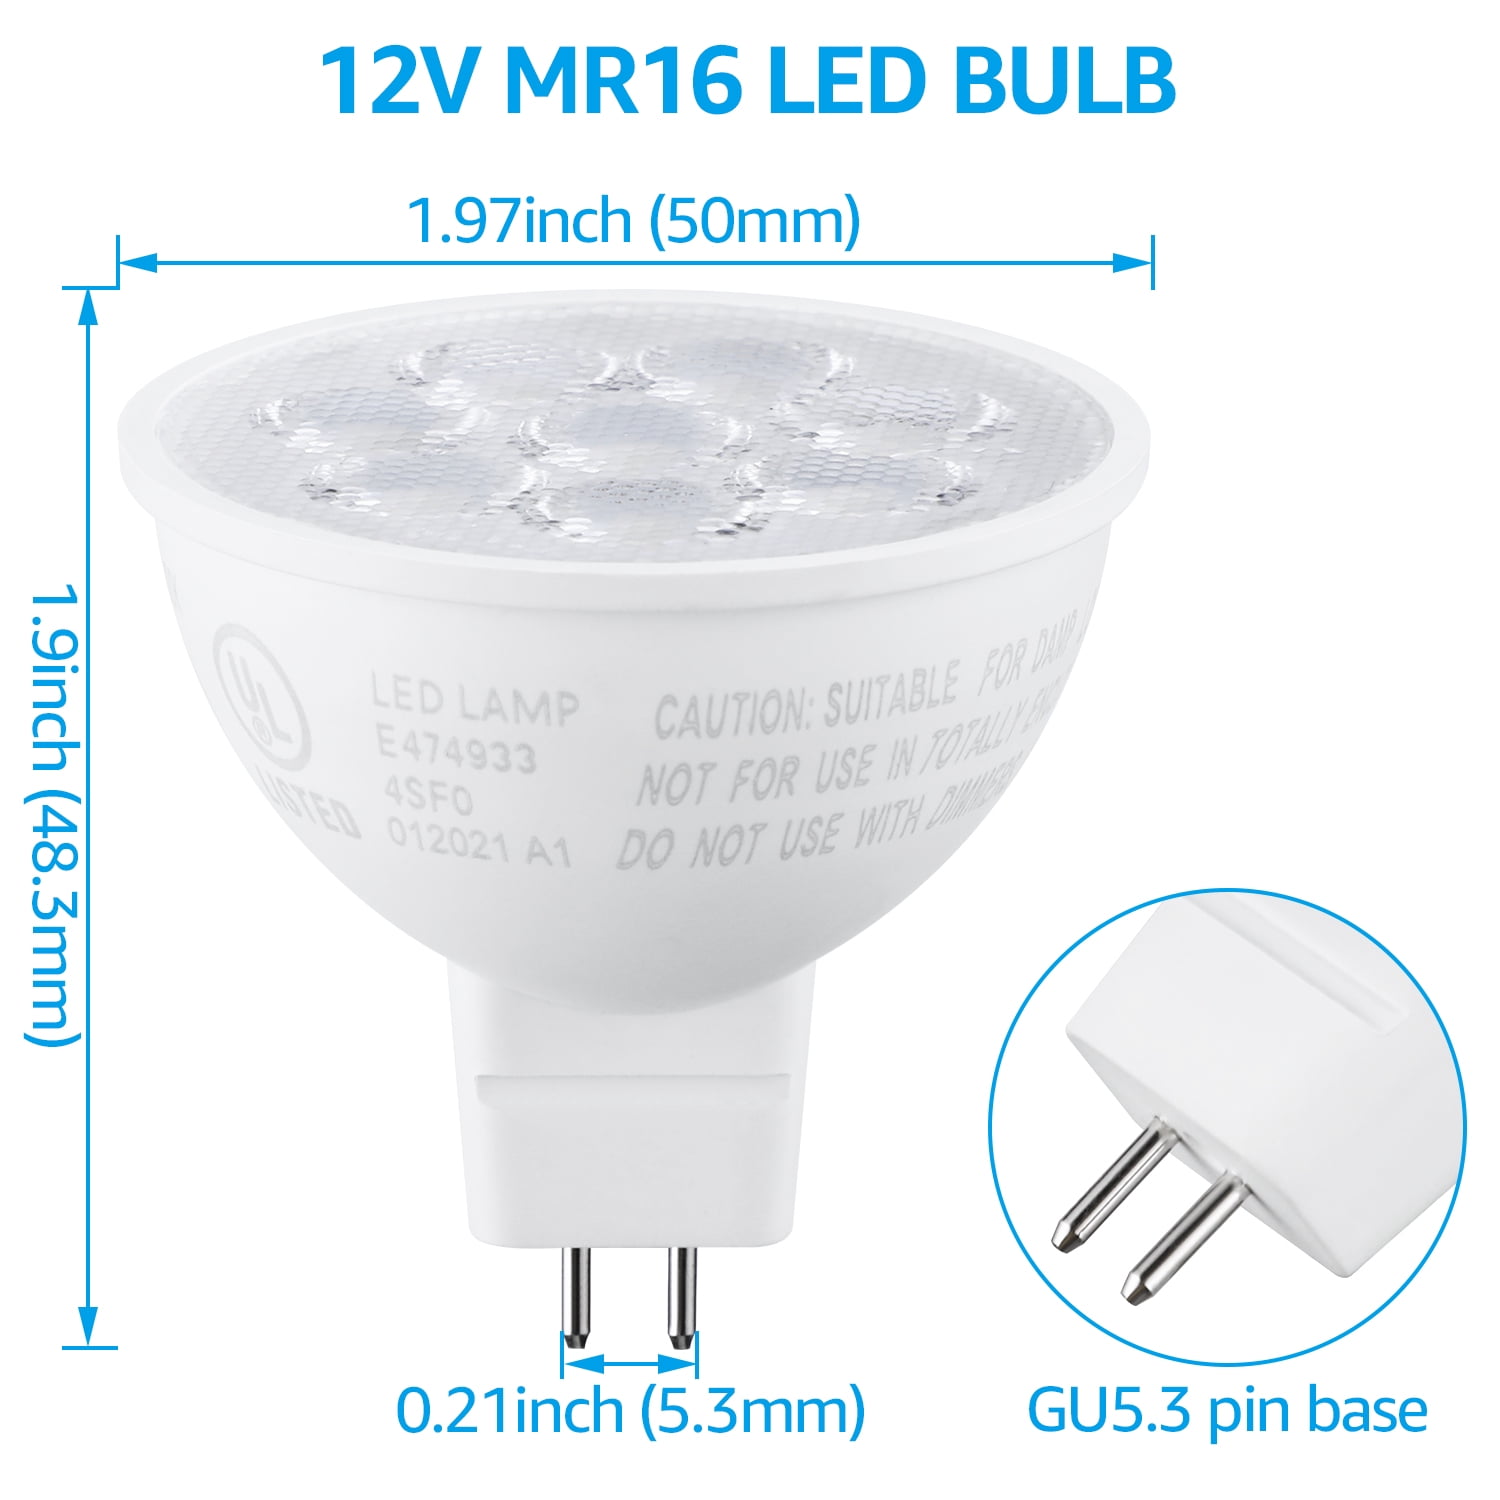 12V Recessed Lighting Pack of 6 Equivalent to 50W Halogen Bulbs 450lm 5W KINDEEP GU5.3 LED Light Bulbs 2800K Warm White 120° Beam Angle Non-Dimmable MR16 5W LED Bulbs 